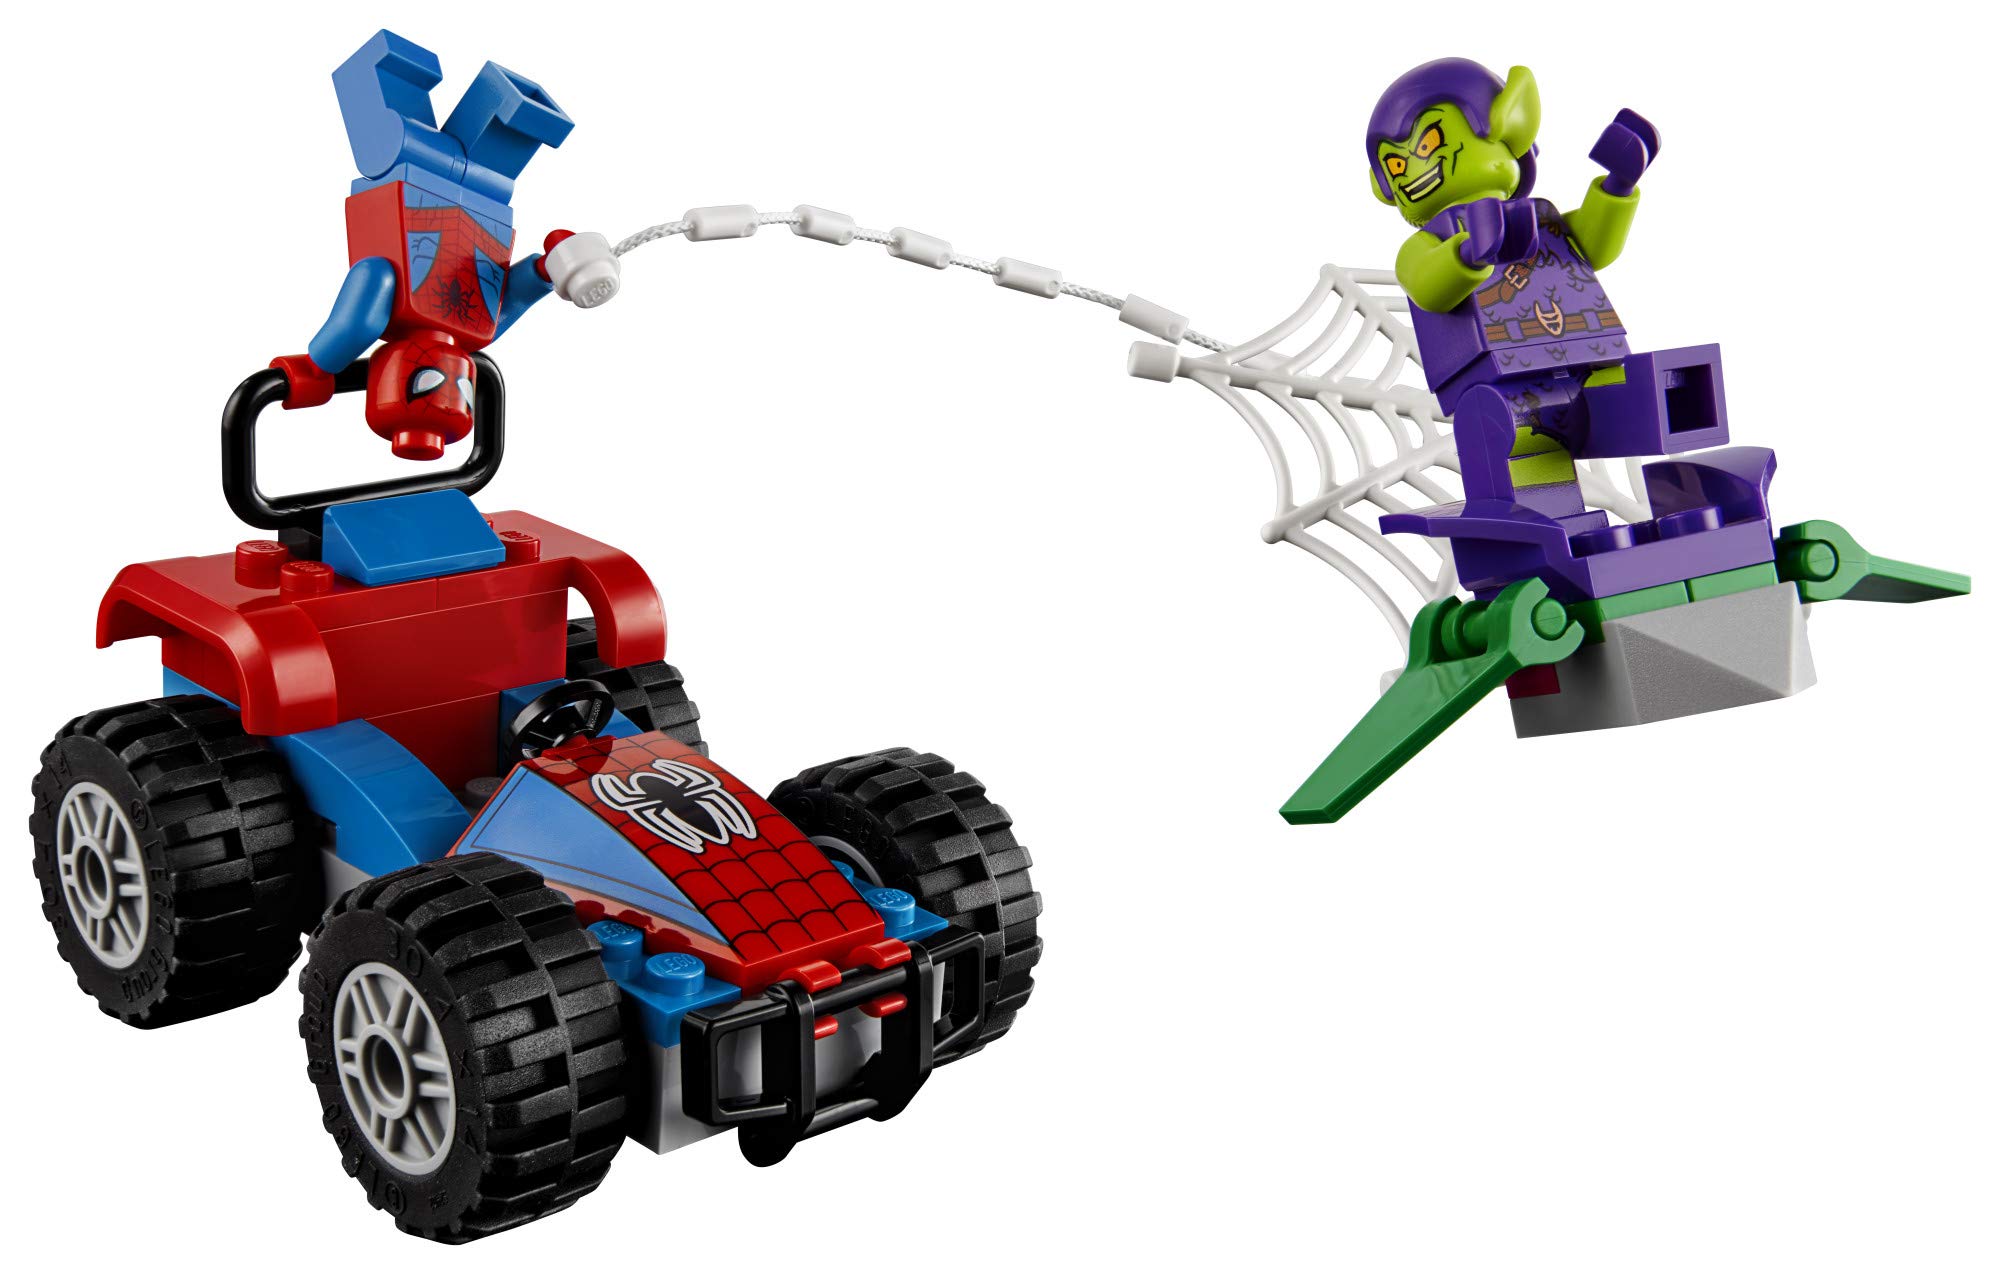 LEGO Marvel Spider-Man Car Chase 76133 Building Kit, Green Goblin and Spider Man Superhero Car Toy Chase (52 Pieces) (Discontinued by Manufacturer)